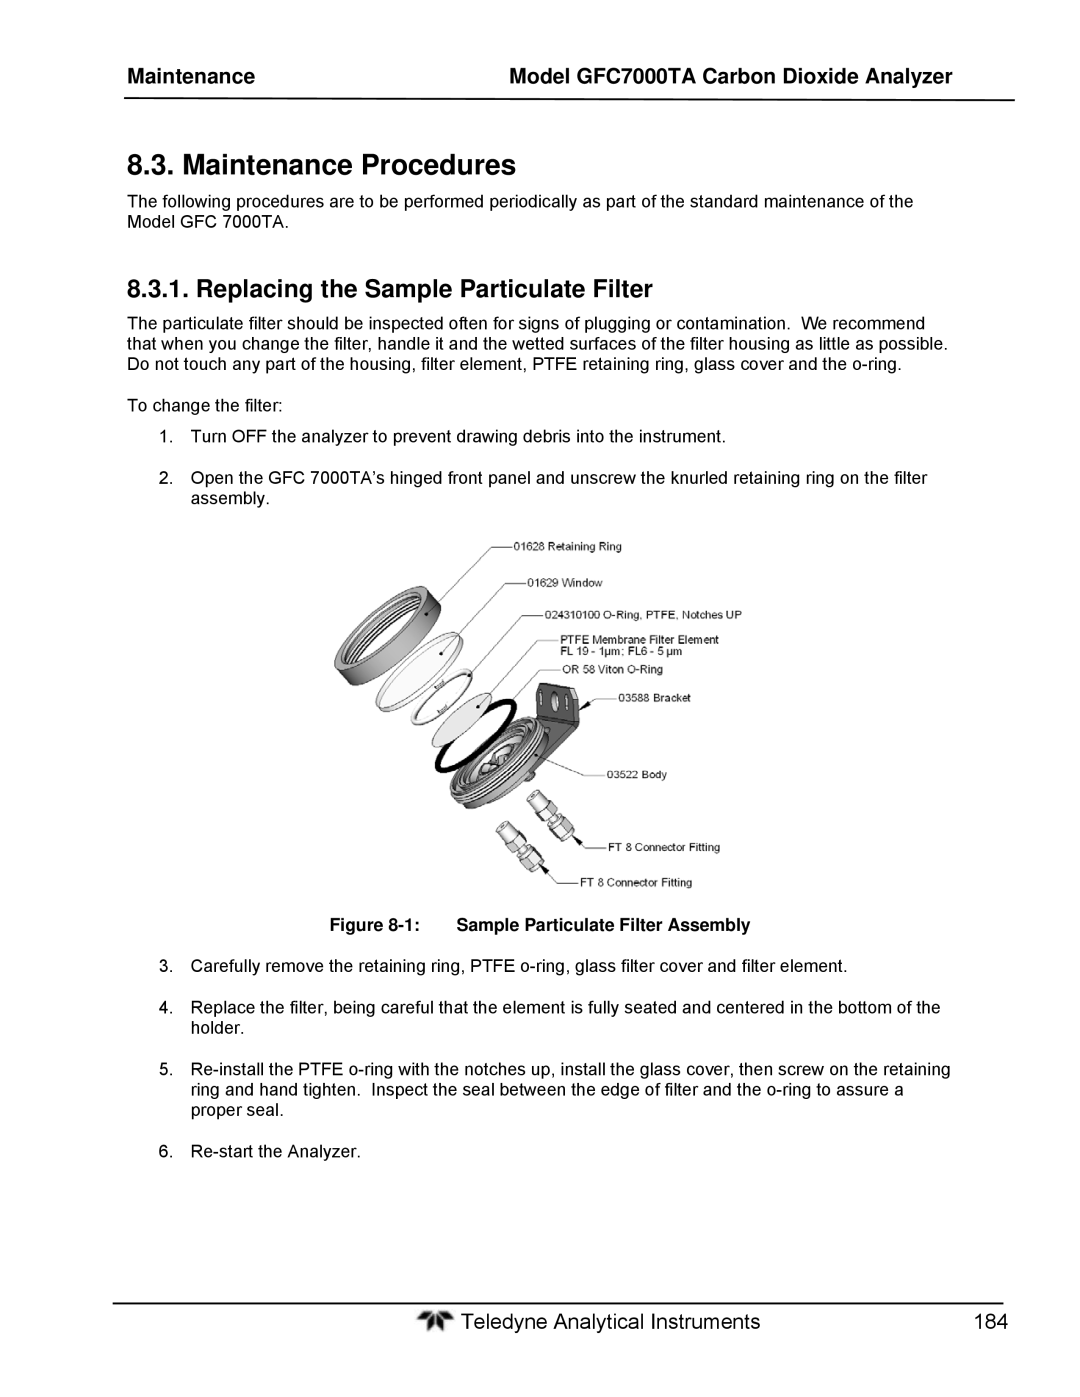 Teledyne gfc 7000ta operation manual Maintenance Procedures, Replacing the Sample Particulate Filter 